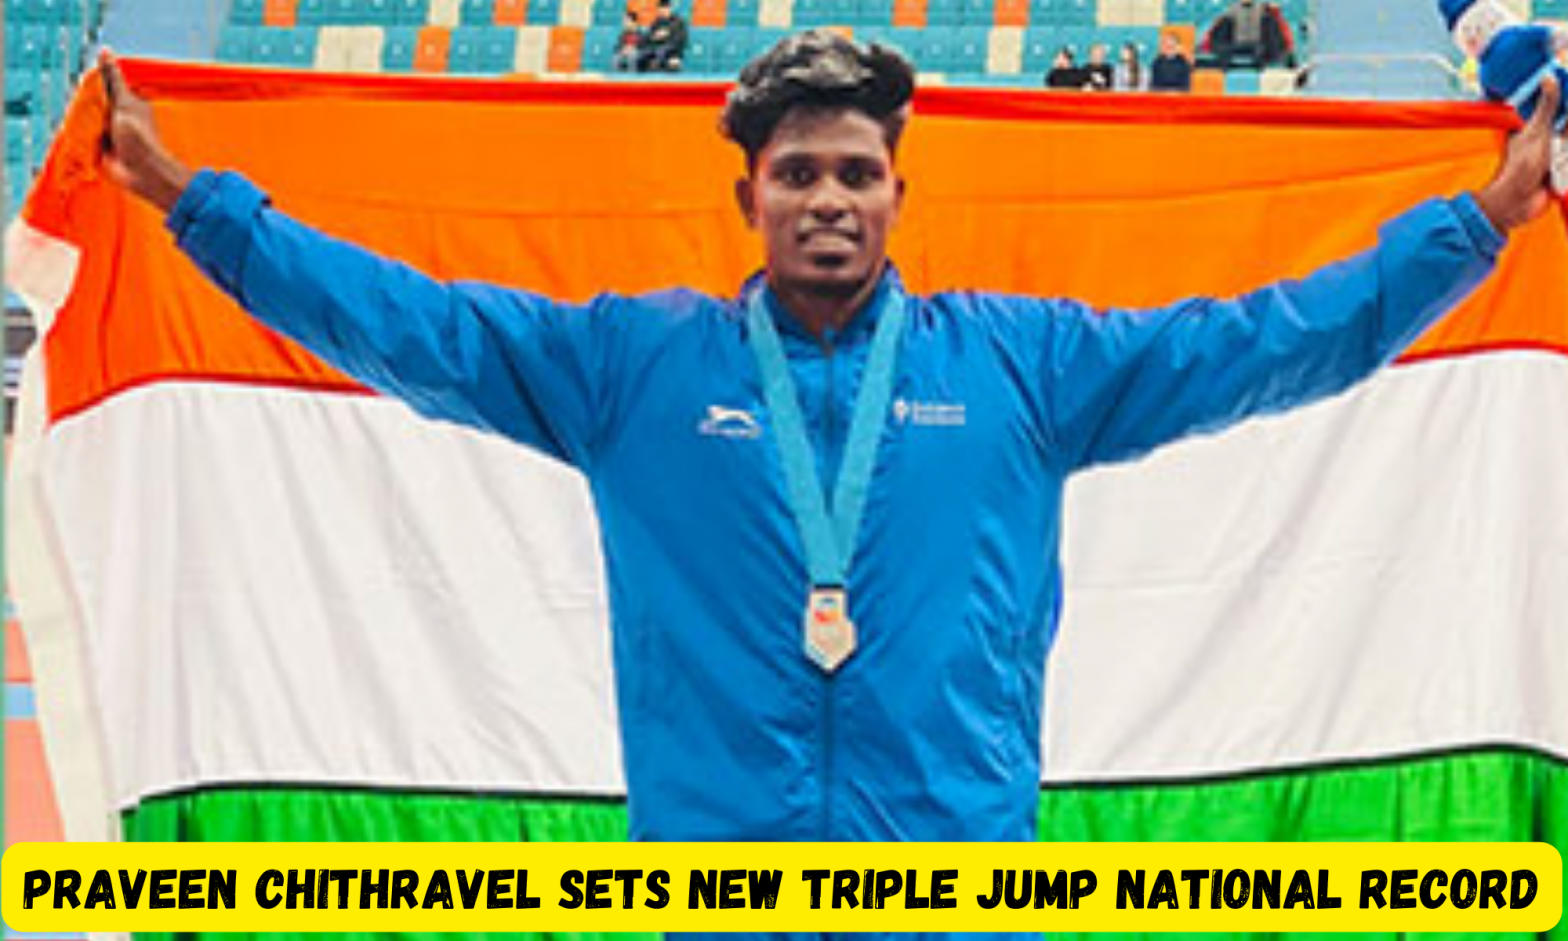 Praveen Chithravel sets new triple jump national record